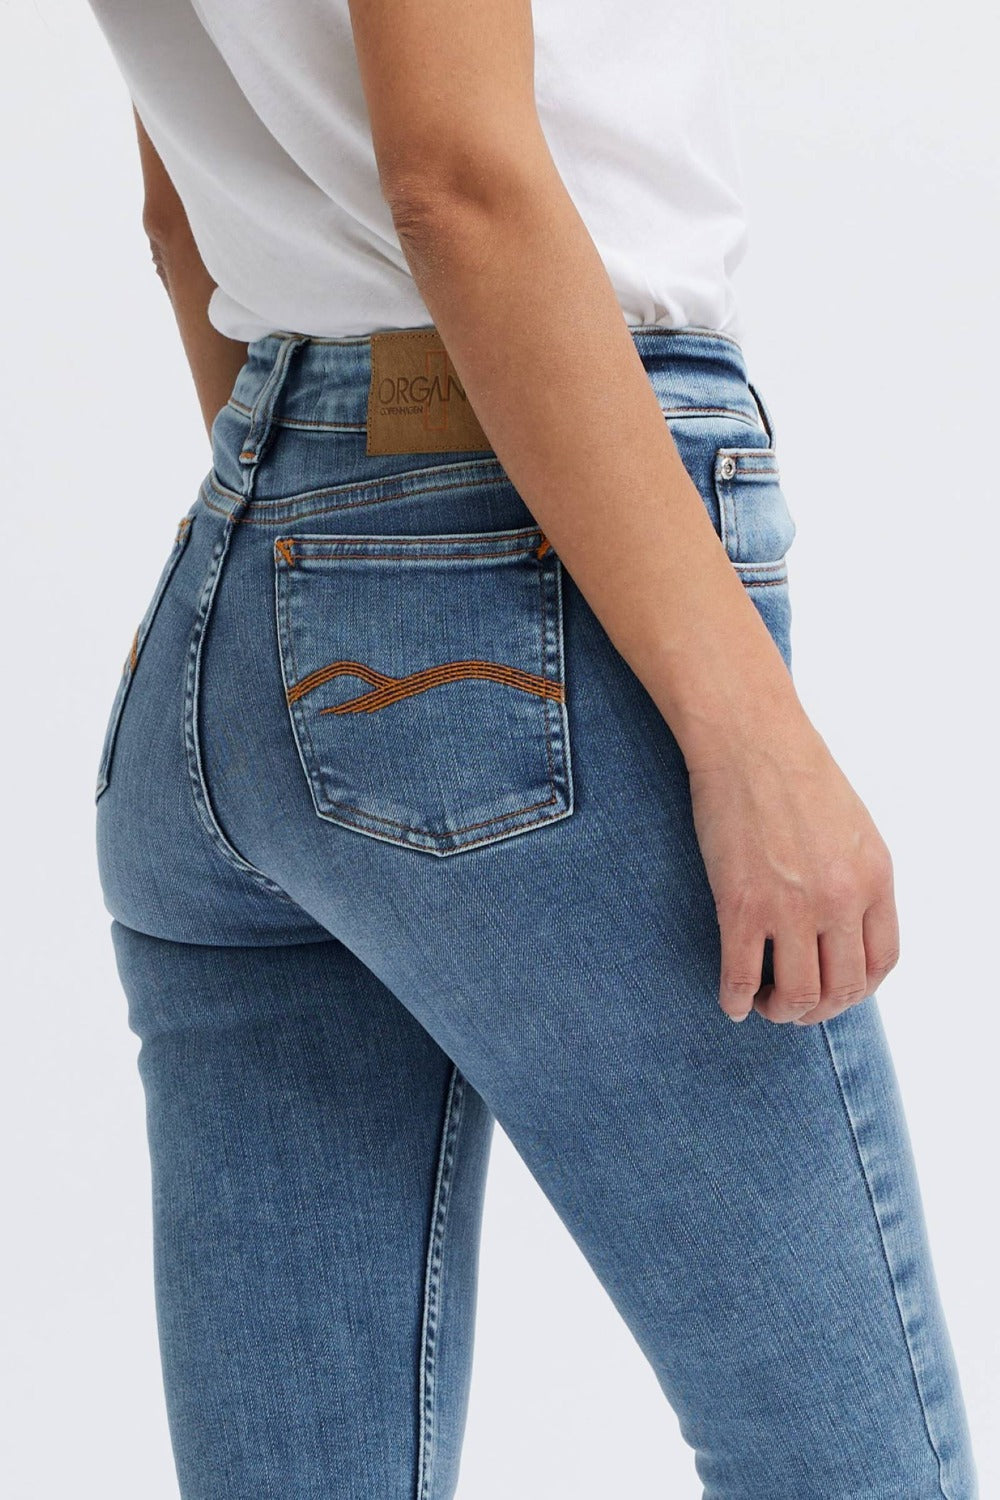 Sustainability and Fashion - Jeans made for circular fashion